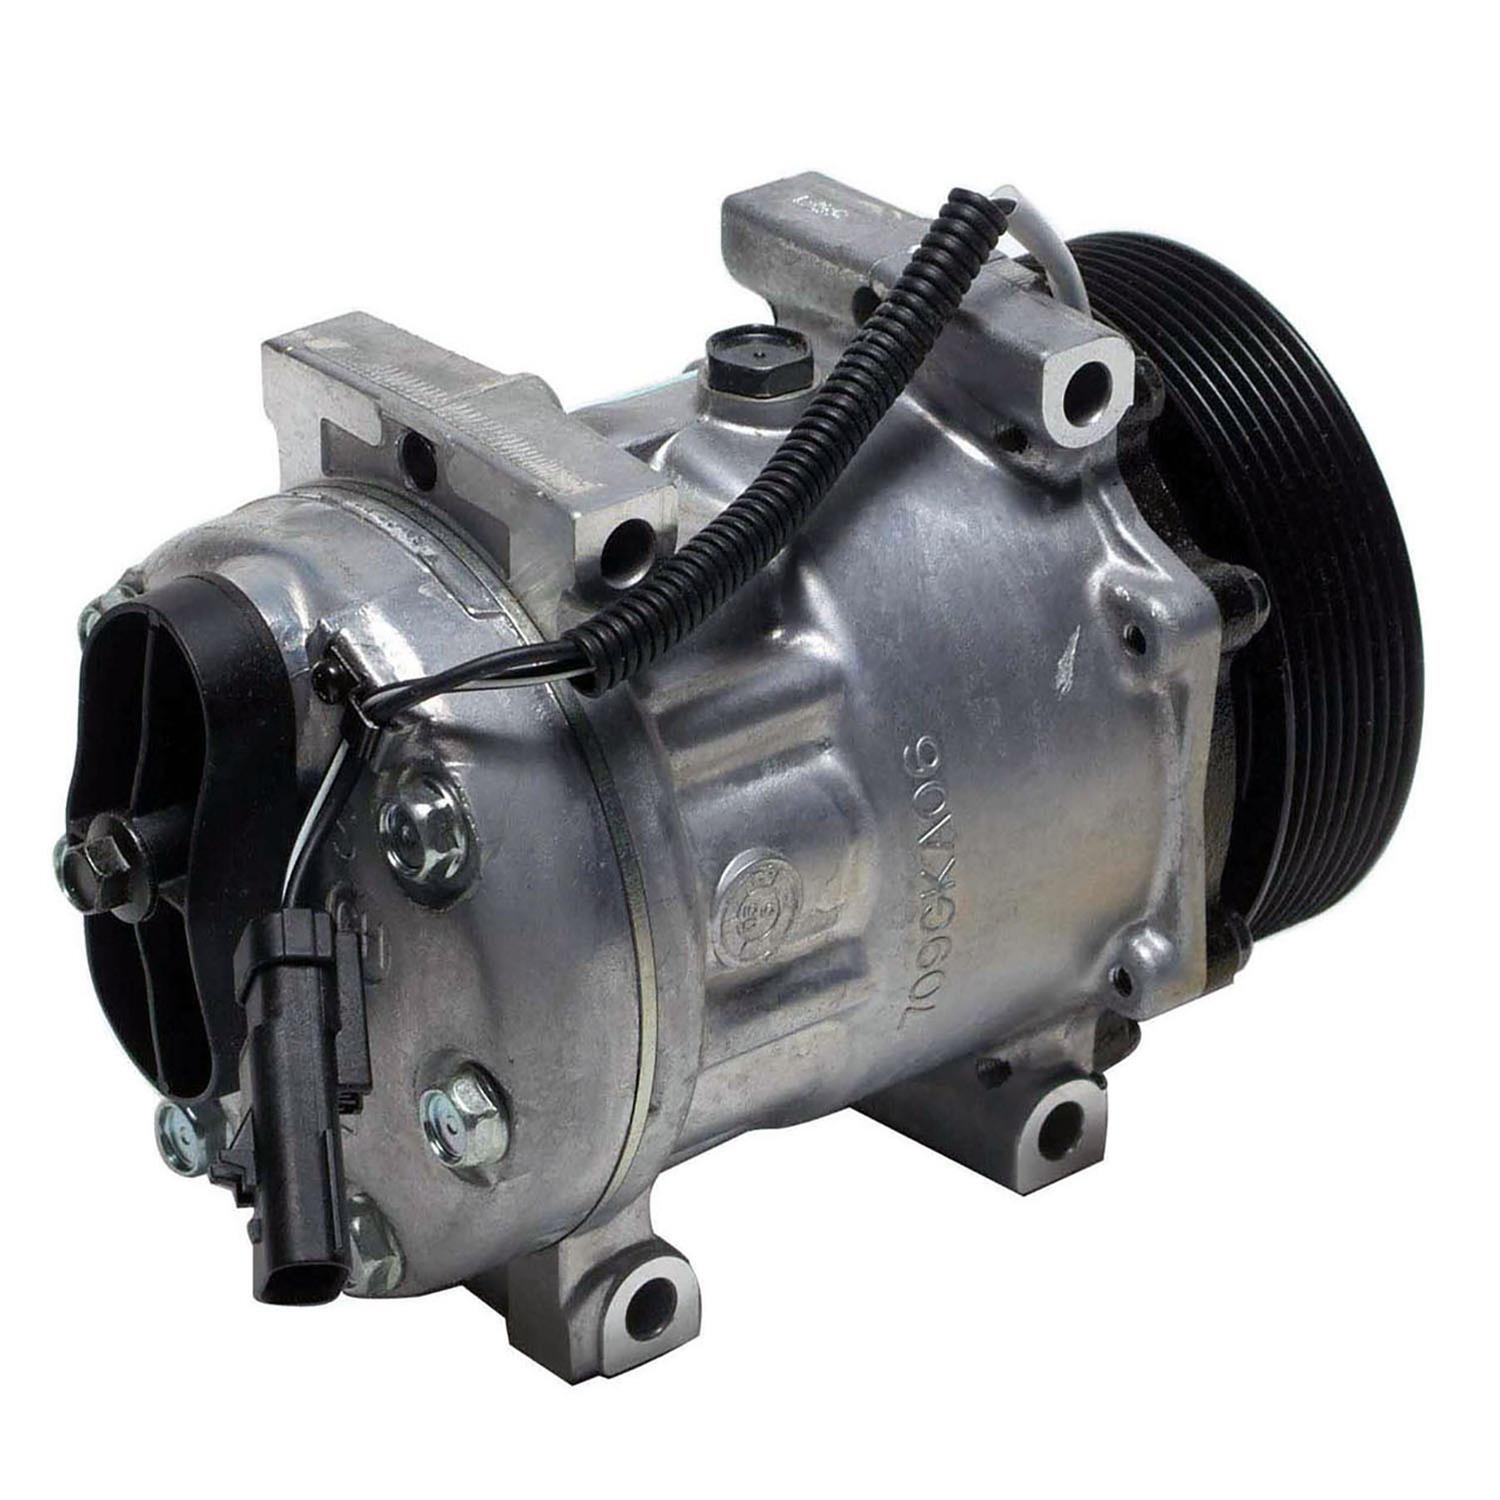 Products 471-7009 Air Conditioning Compressors | Racing